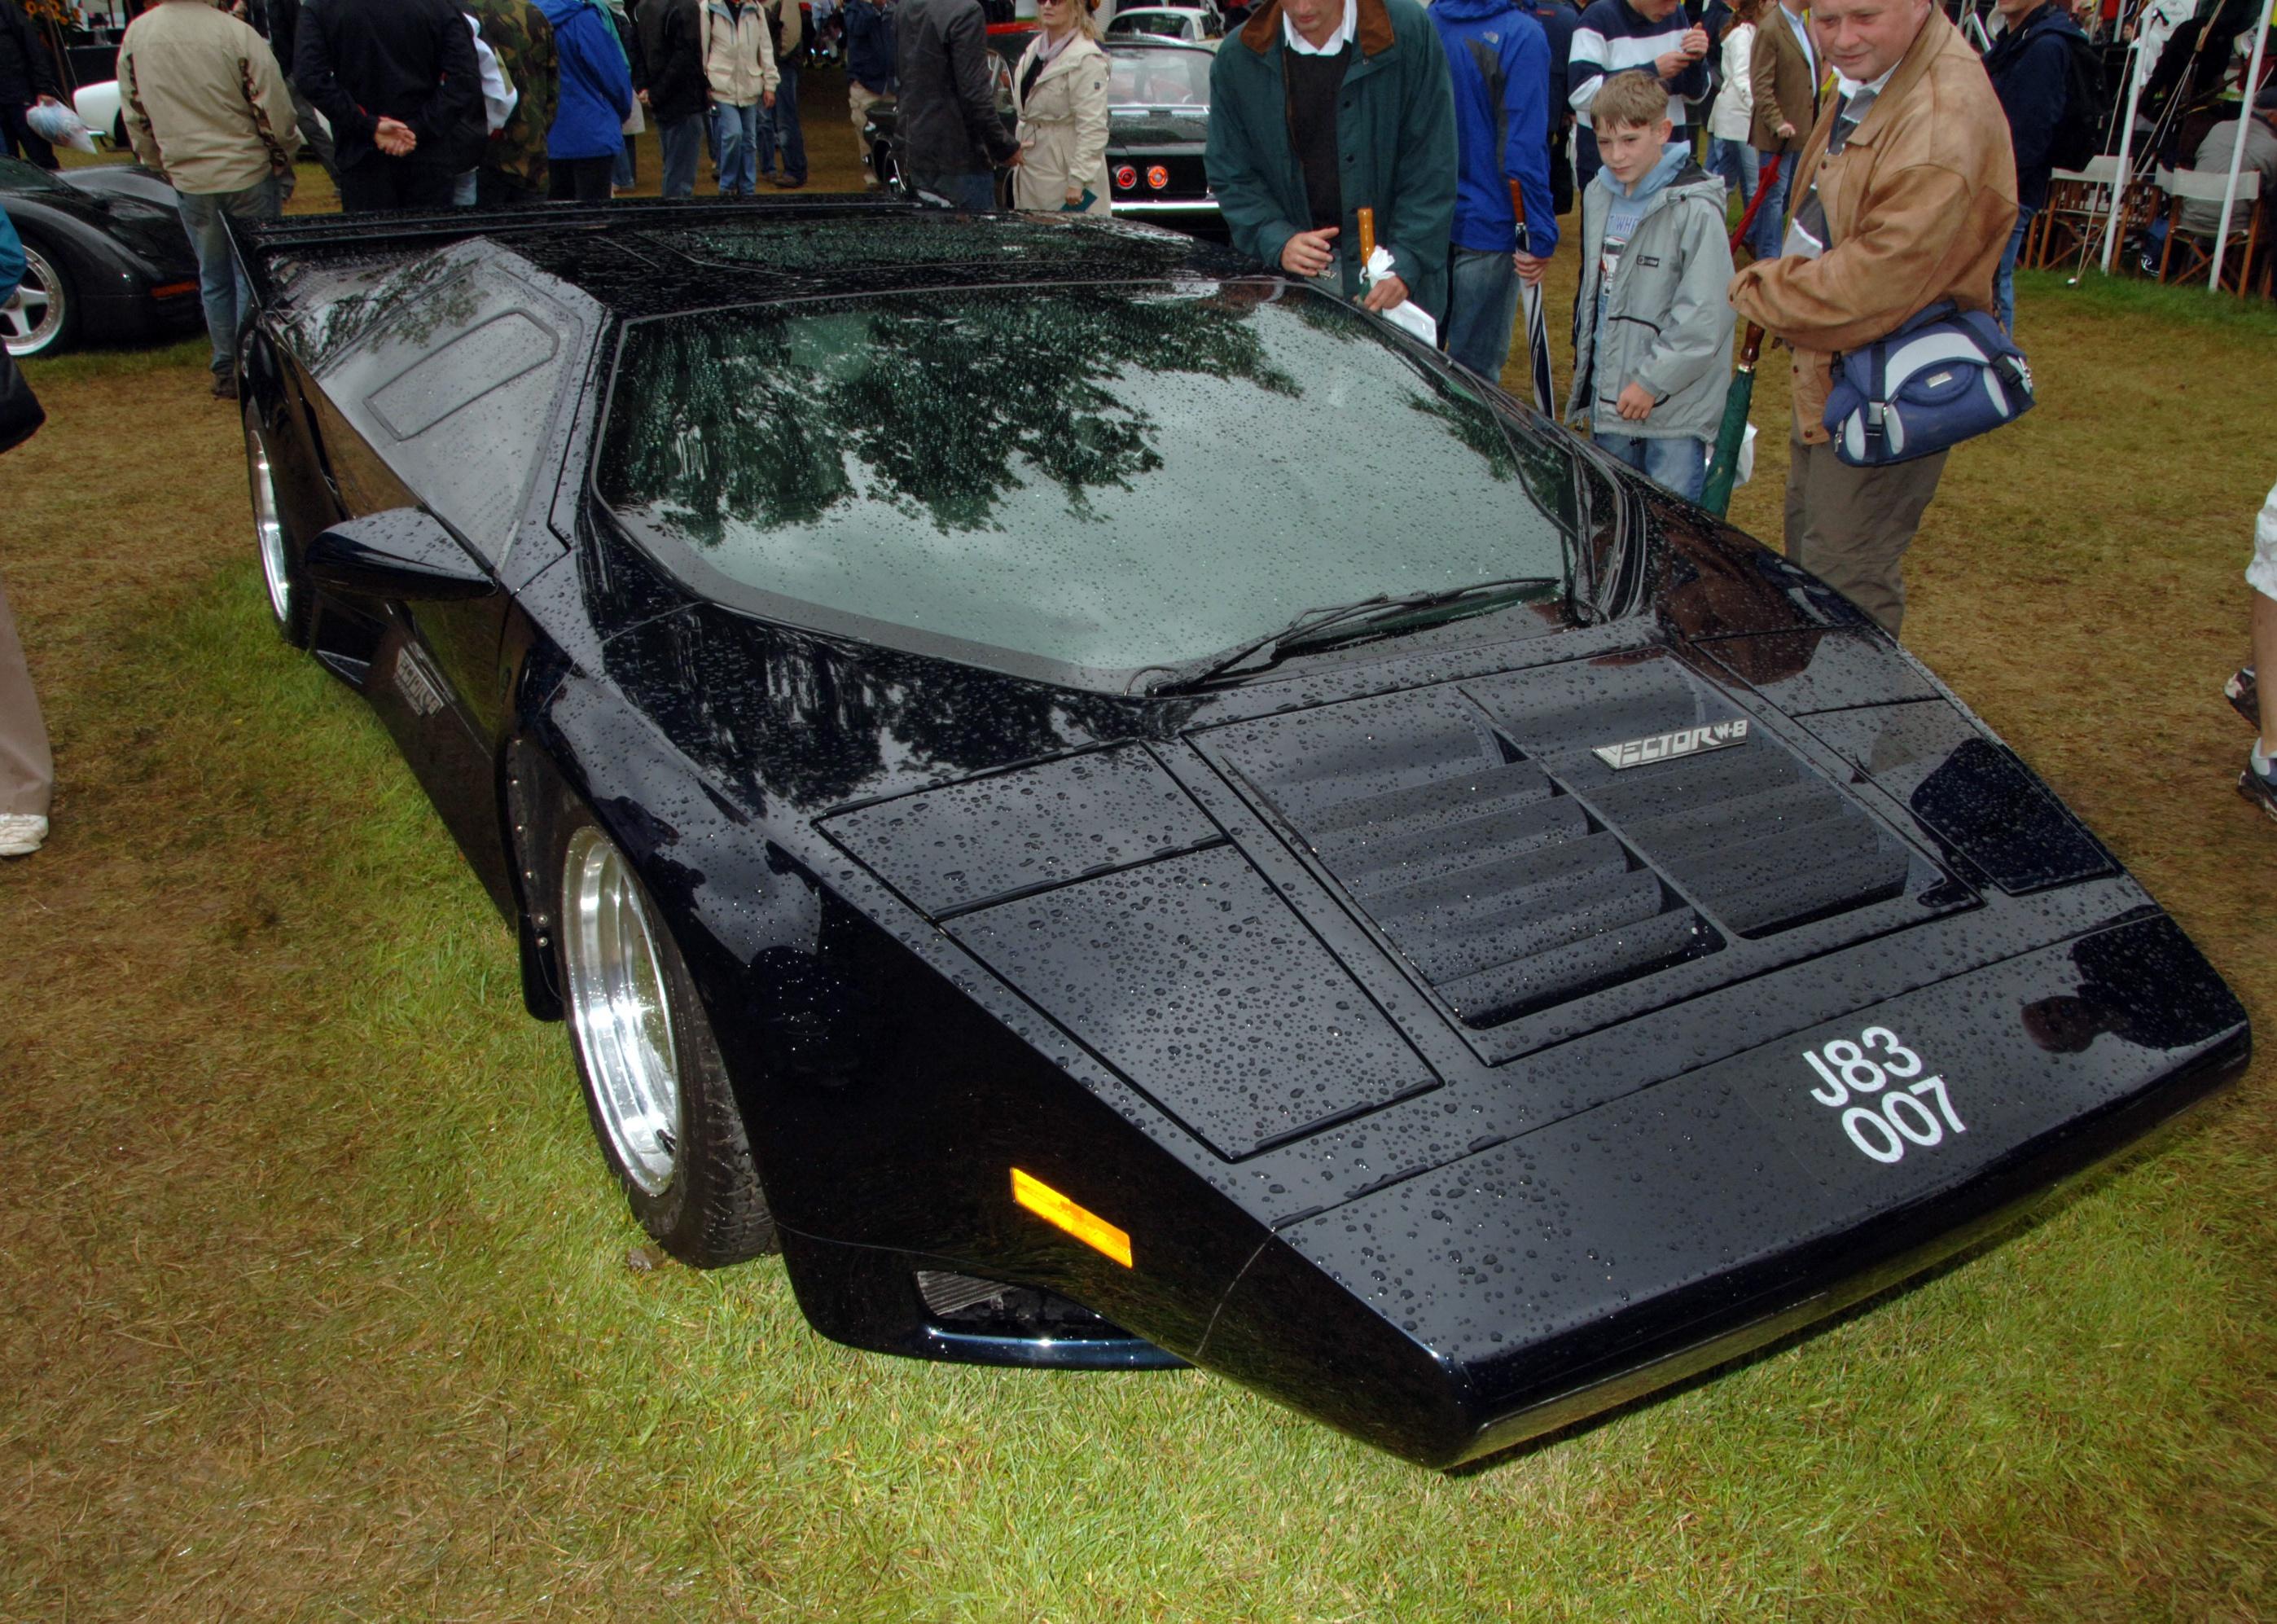 The Vector W8 is displayed at the Goodwood Festival of Speed.